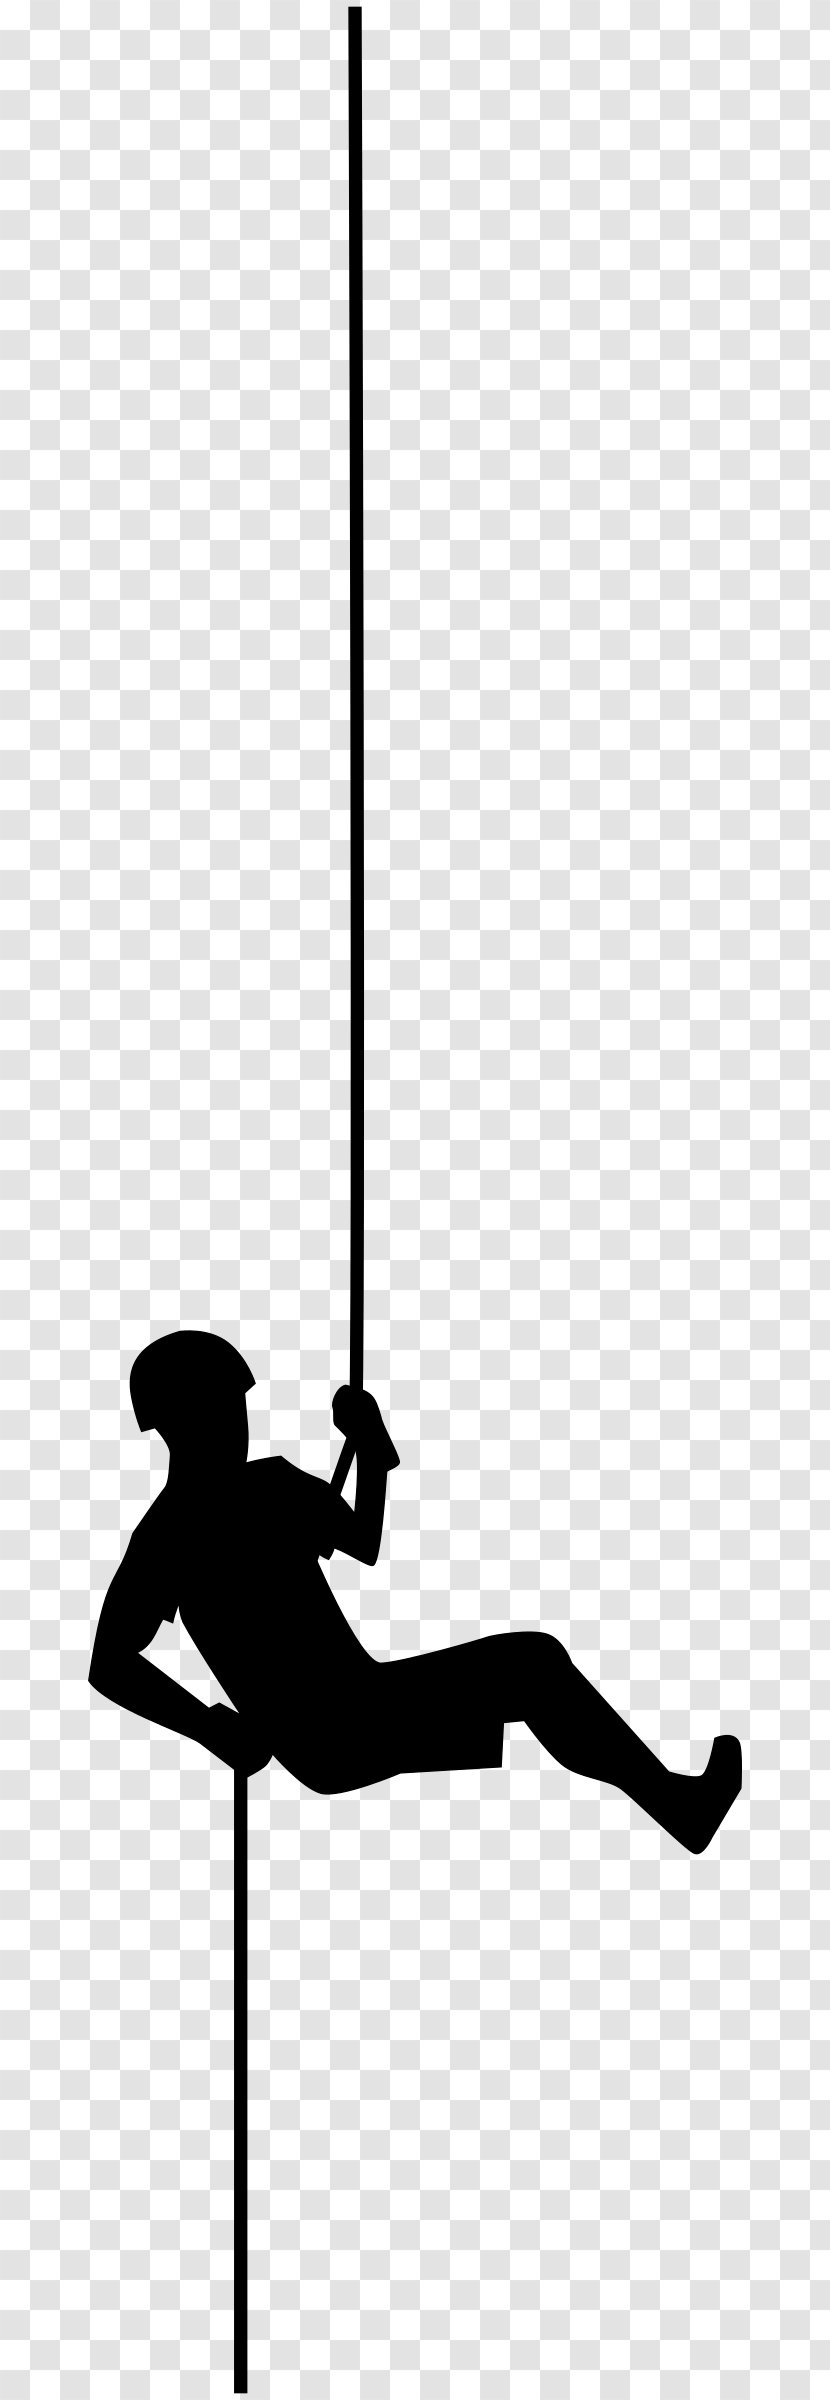 Abseiling Climbing Clip Art - Black - Hanging Rope Transparent PNG